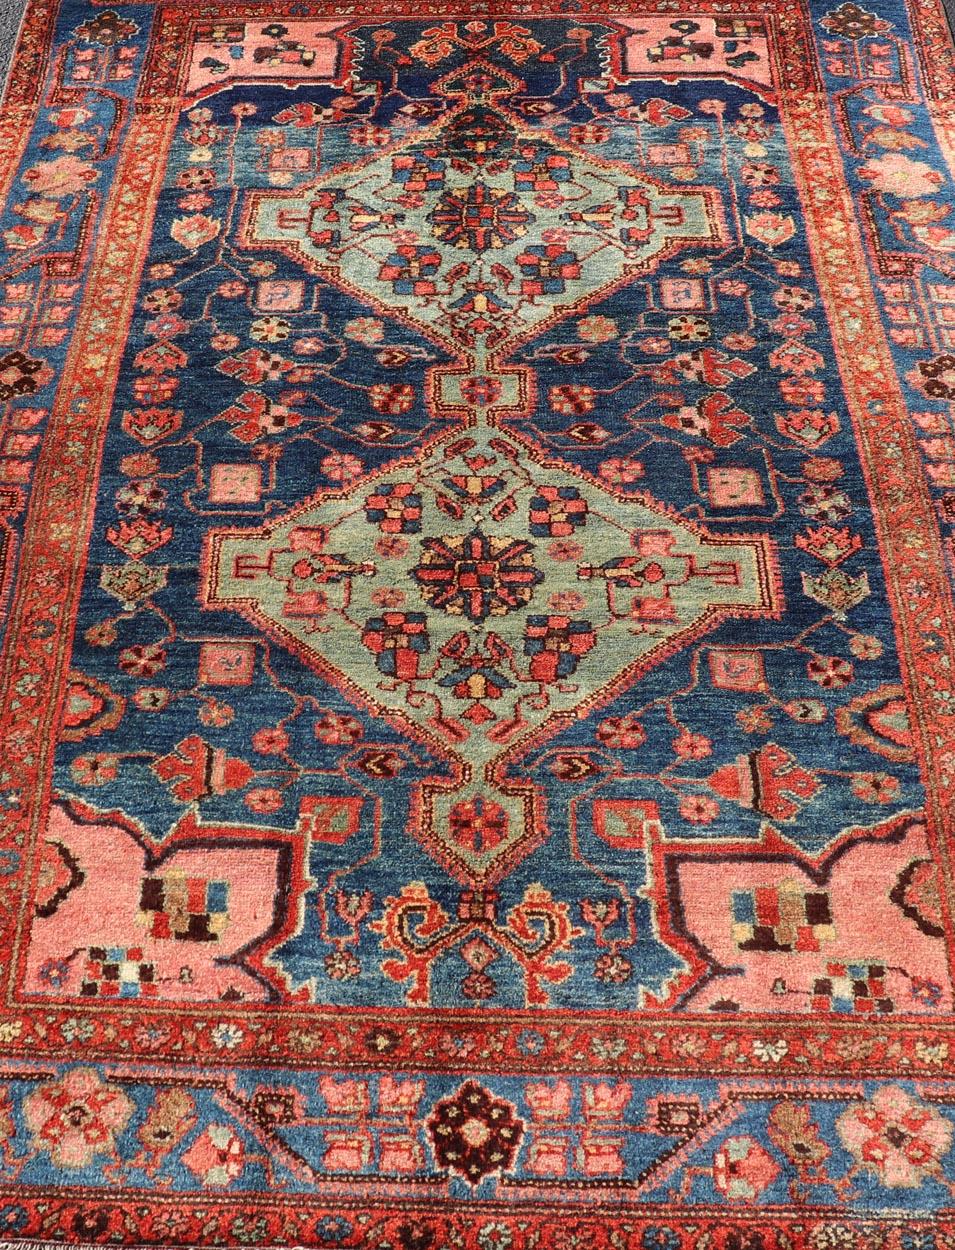 Antique Persian Karajeh Rug with Geometric Medallions in Green, Blue, and Red 2